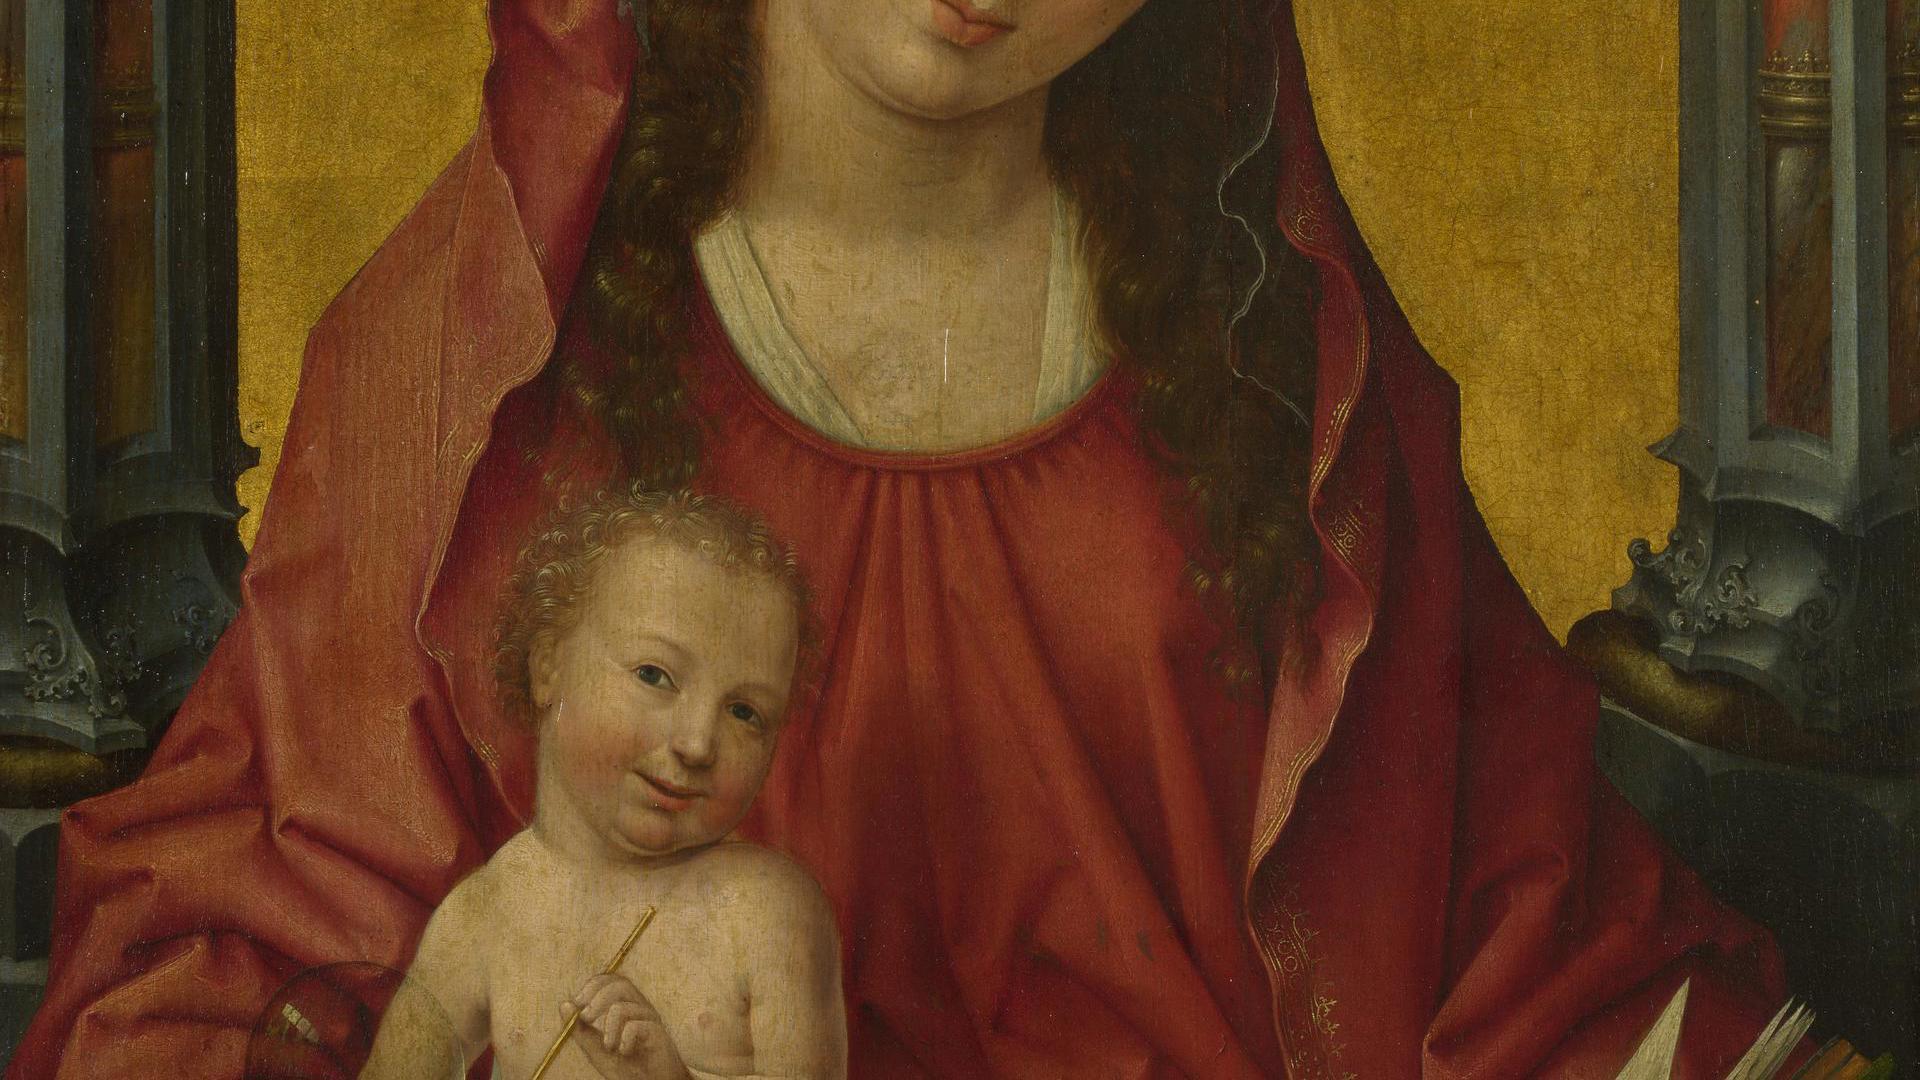 The Virgin and Child by Workshop of Jean Bellegambe